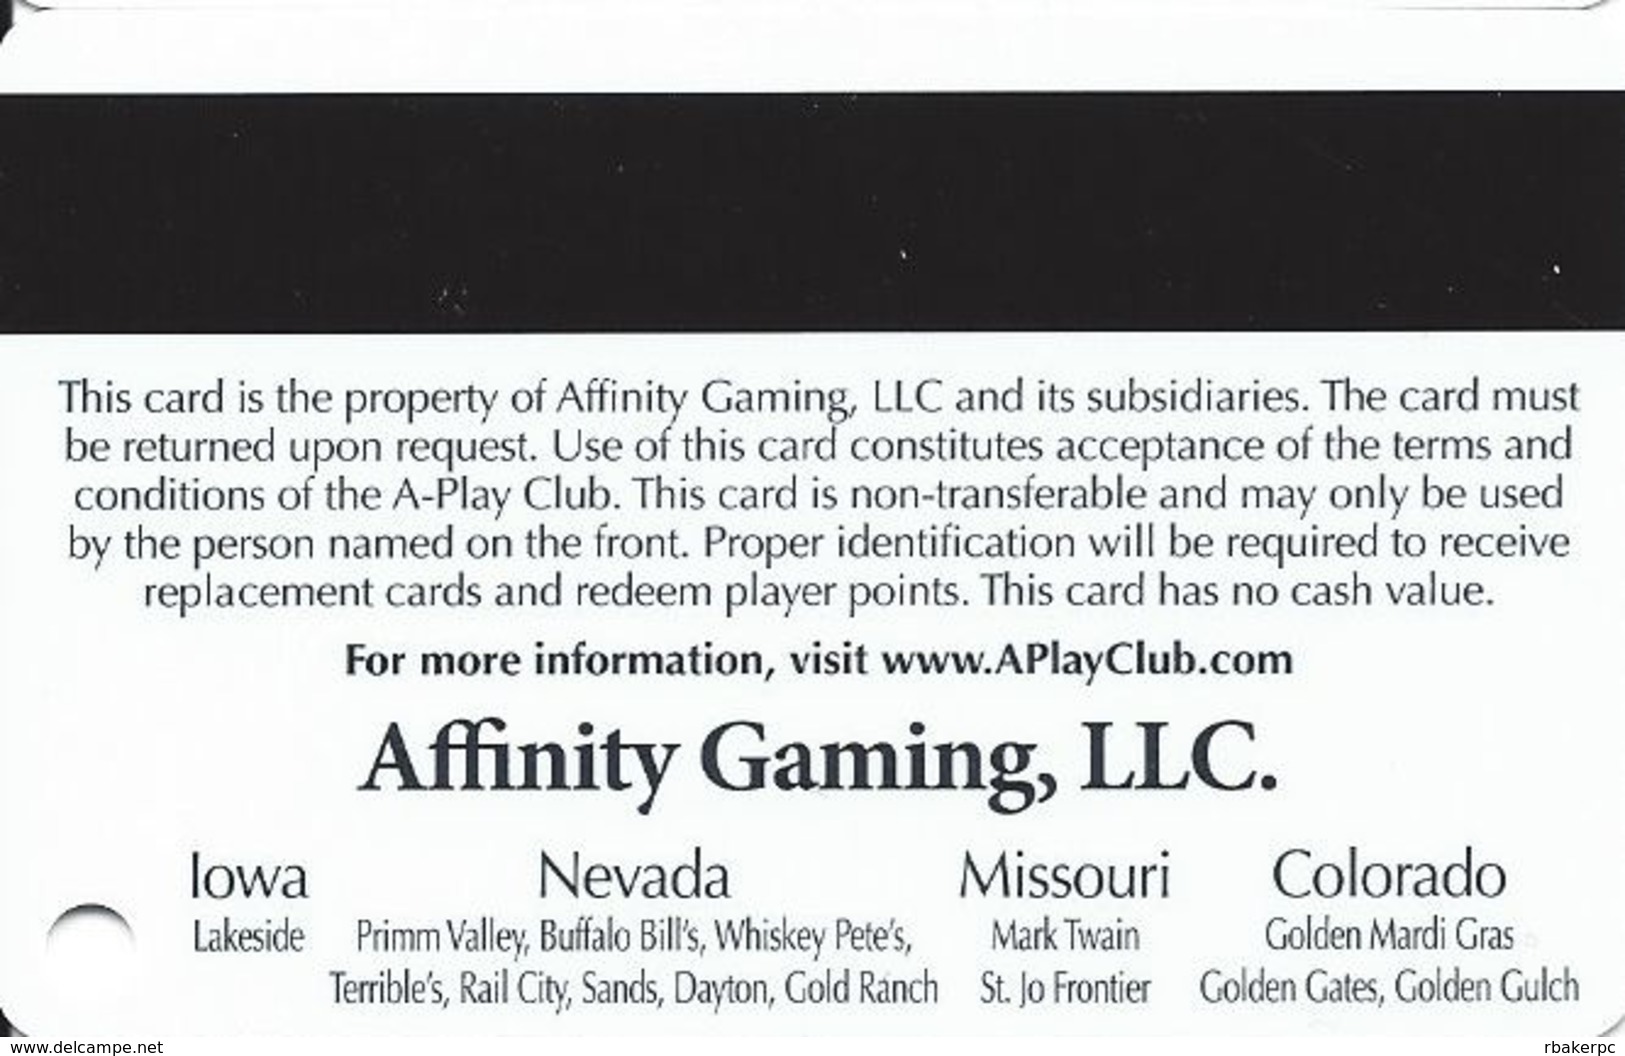 Affinity Gaming APlay Club Slot Card - Casinos In 4 States Listed On Back With Sands, Dayton & Gold Ranch - Casino Cards